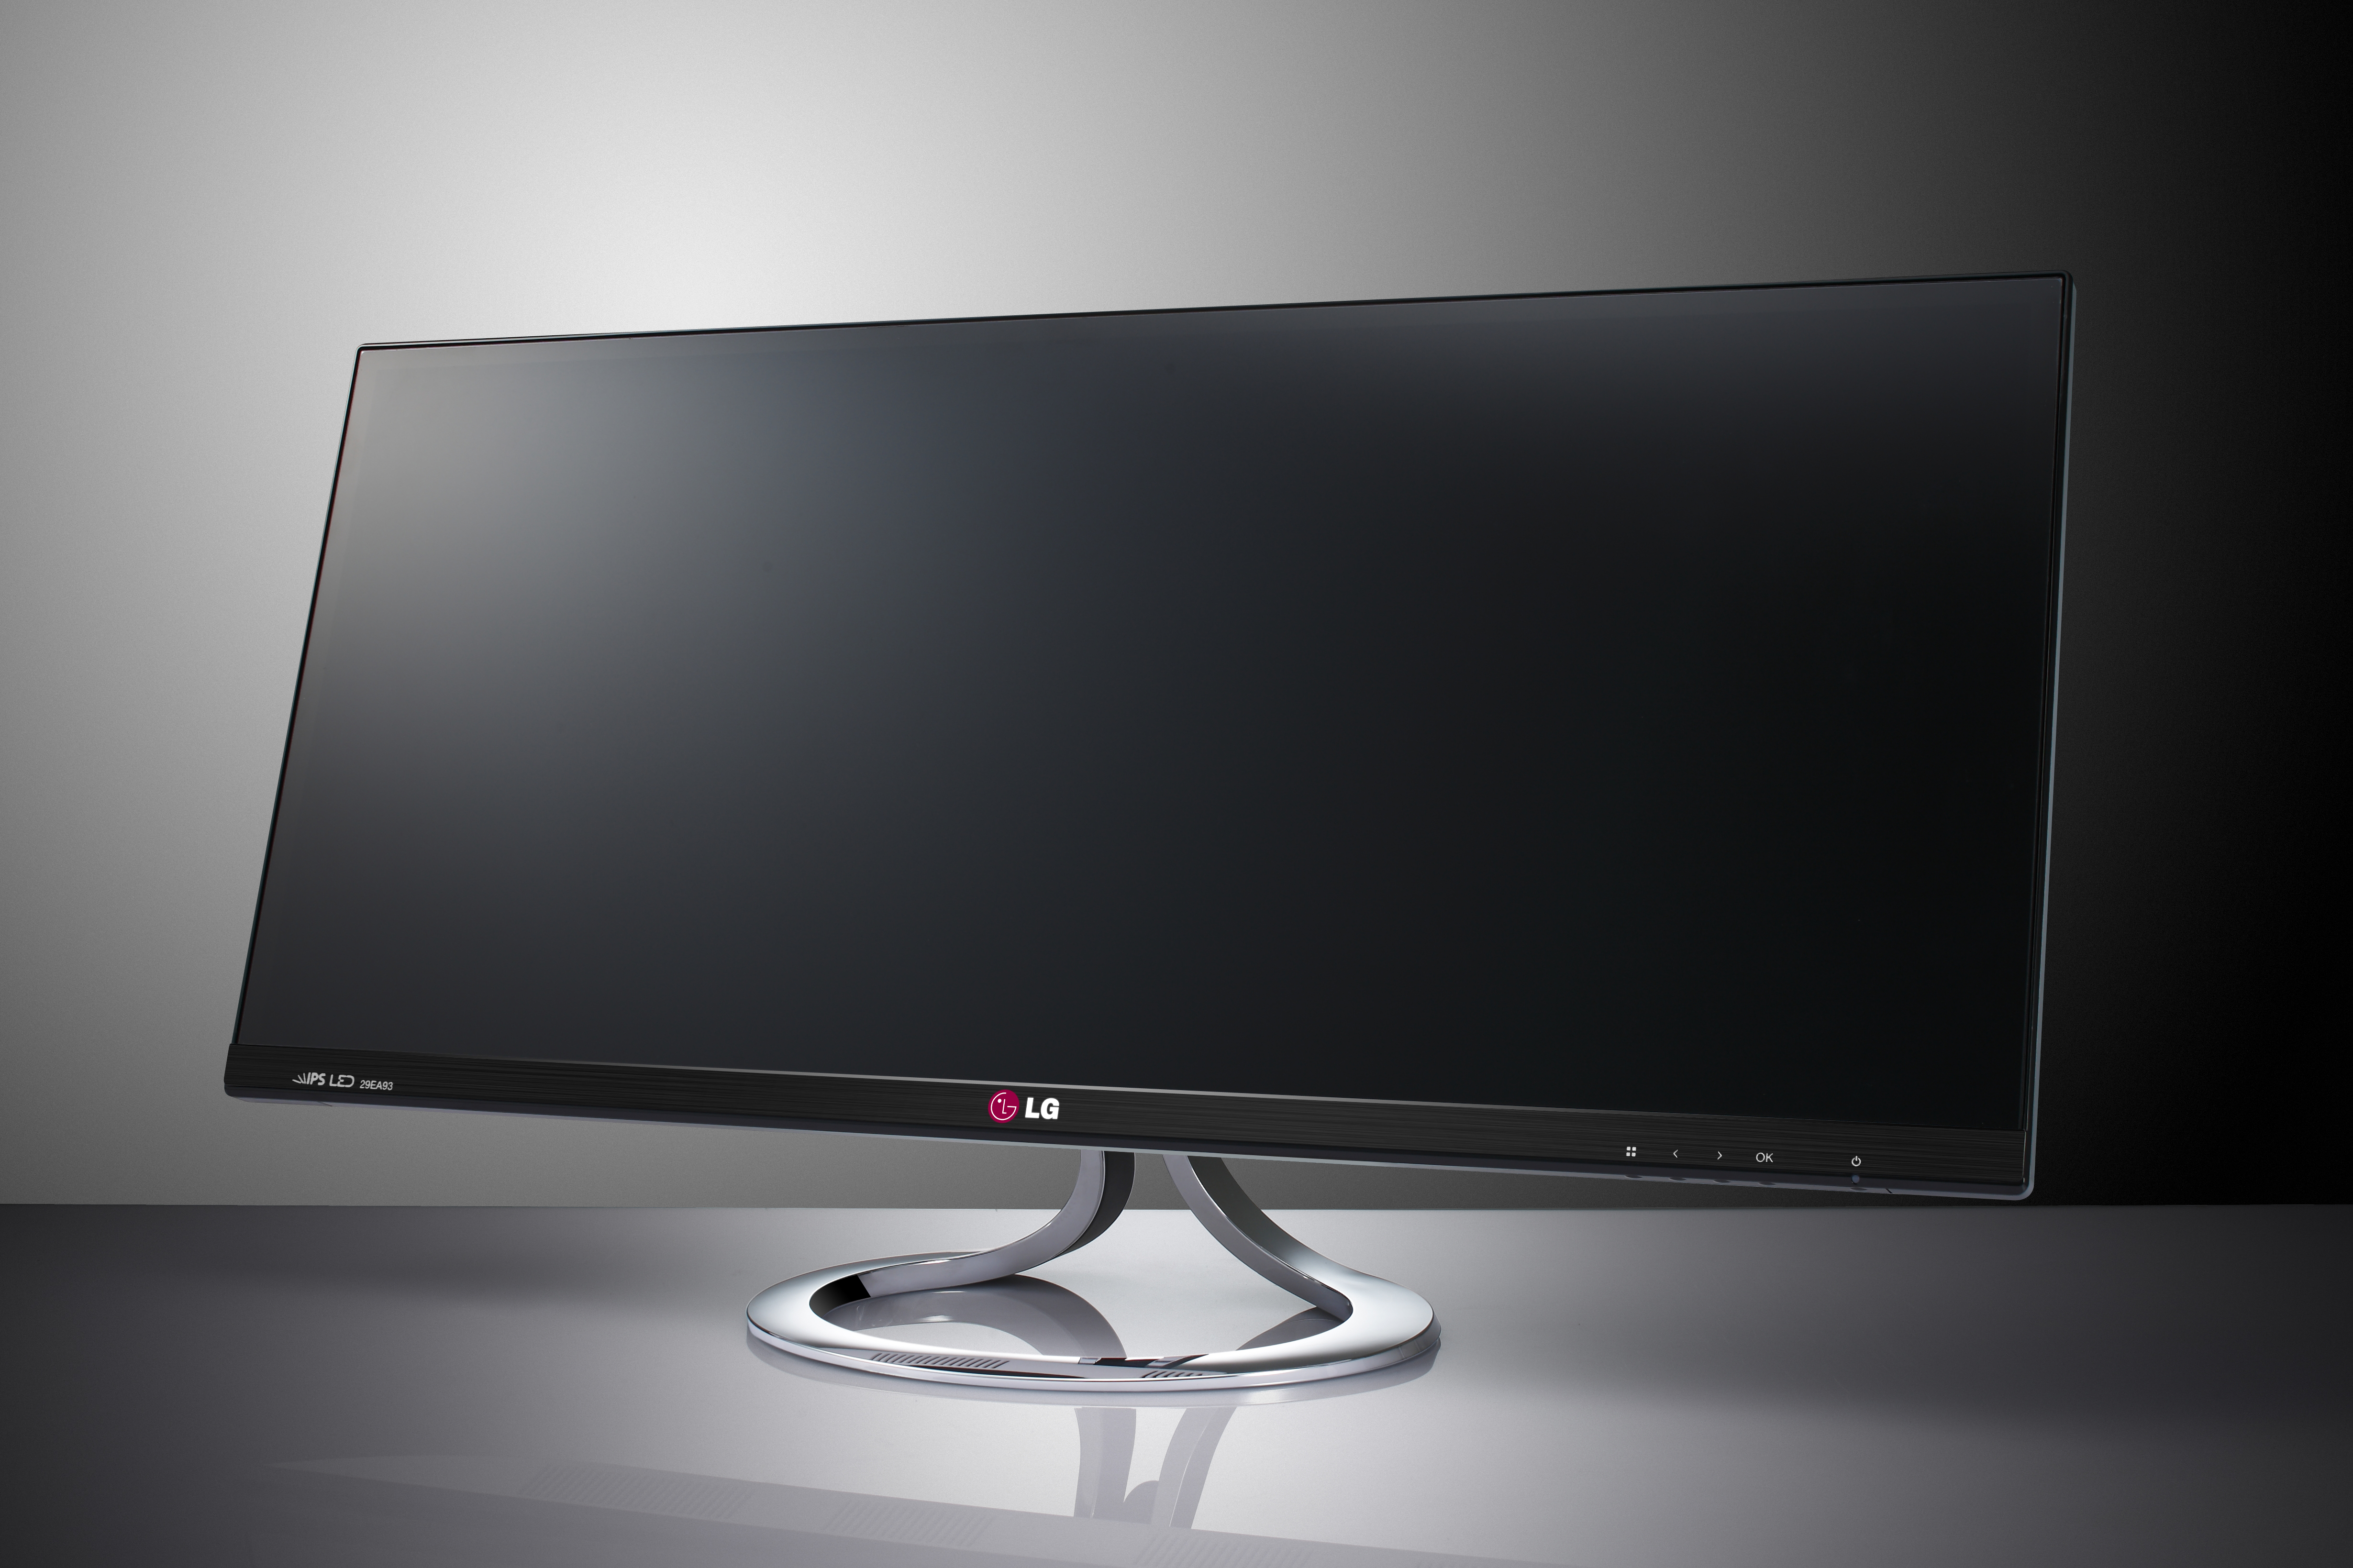 The LG UltraWide monitor model EA93 in front of a grey background